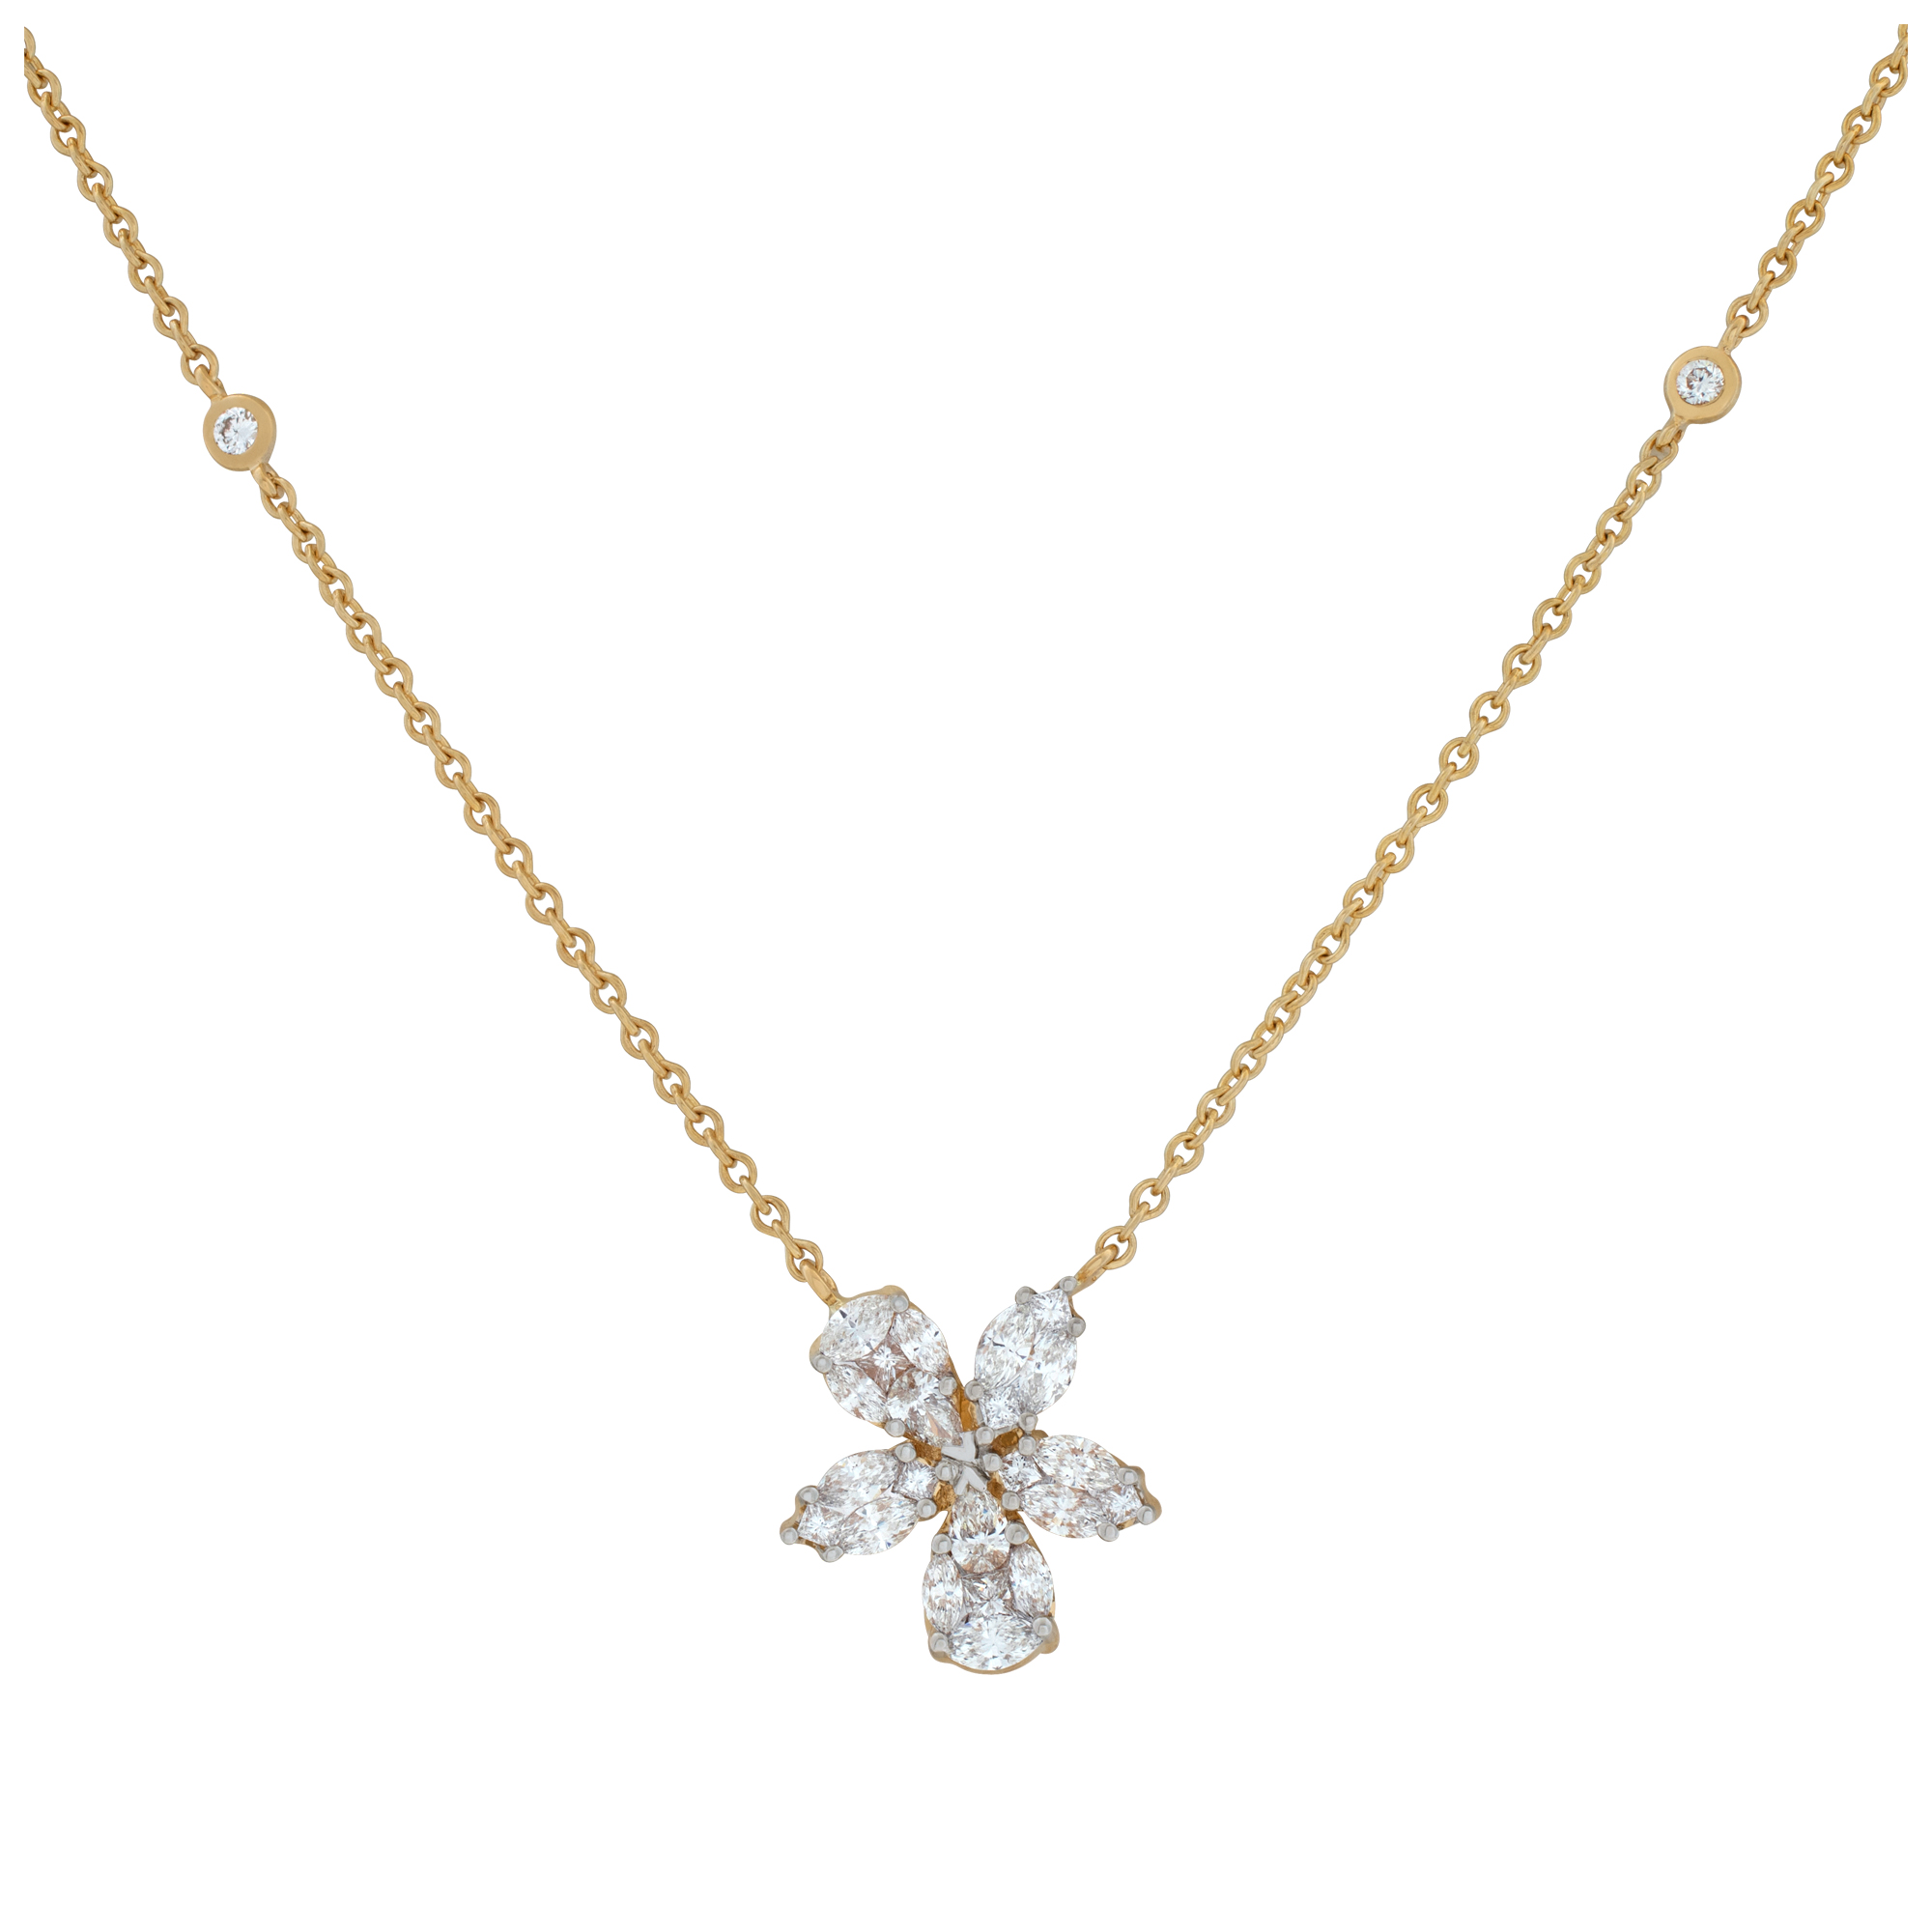 Illusion set diamond flower pendant in 18k yellow gold with 1.14 carat in diamonds. 18 inch length. image 1